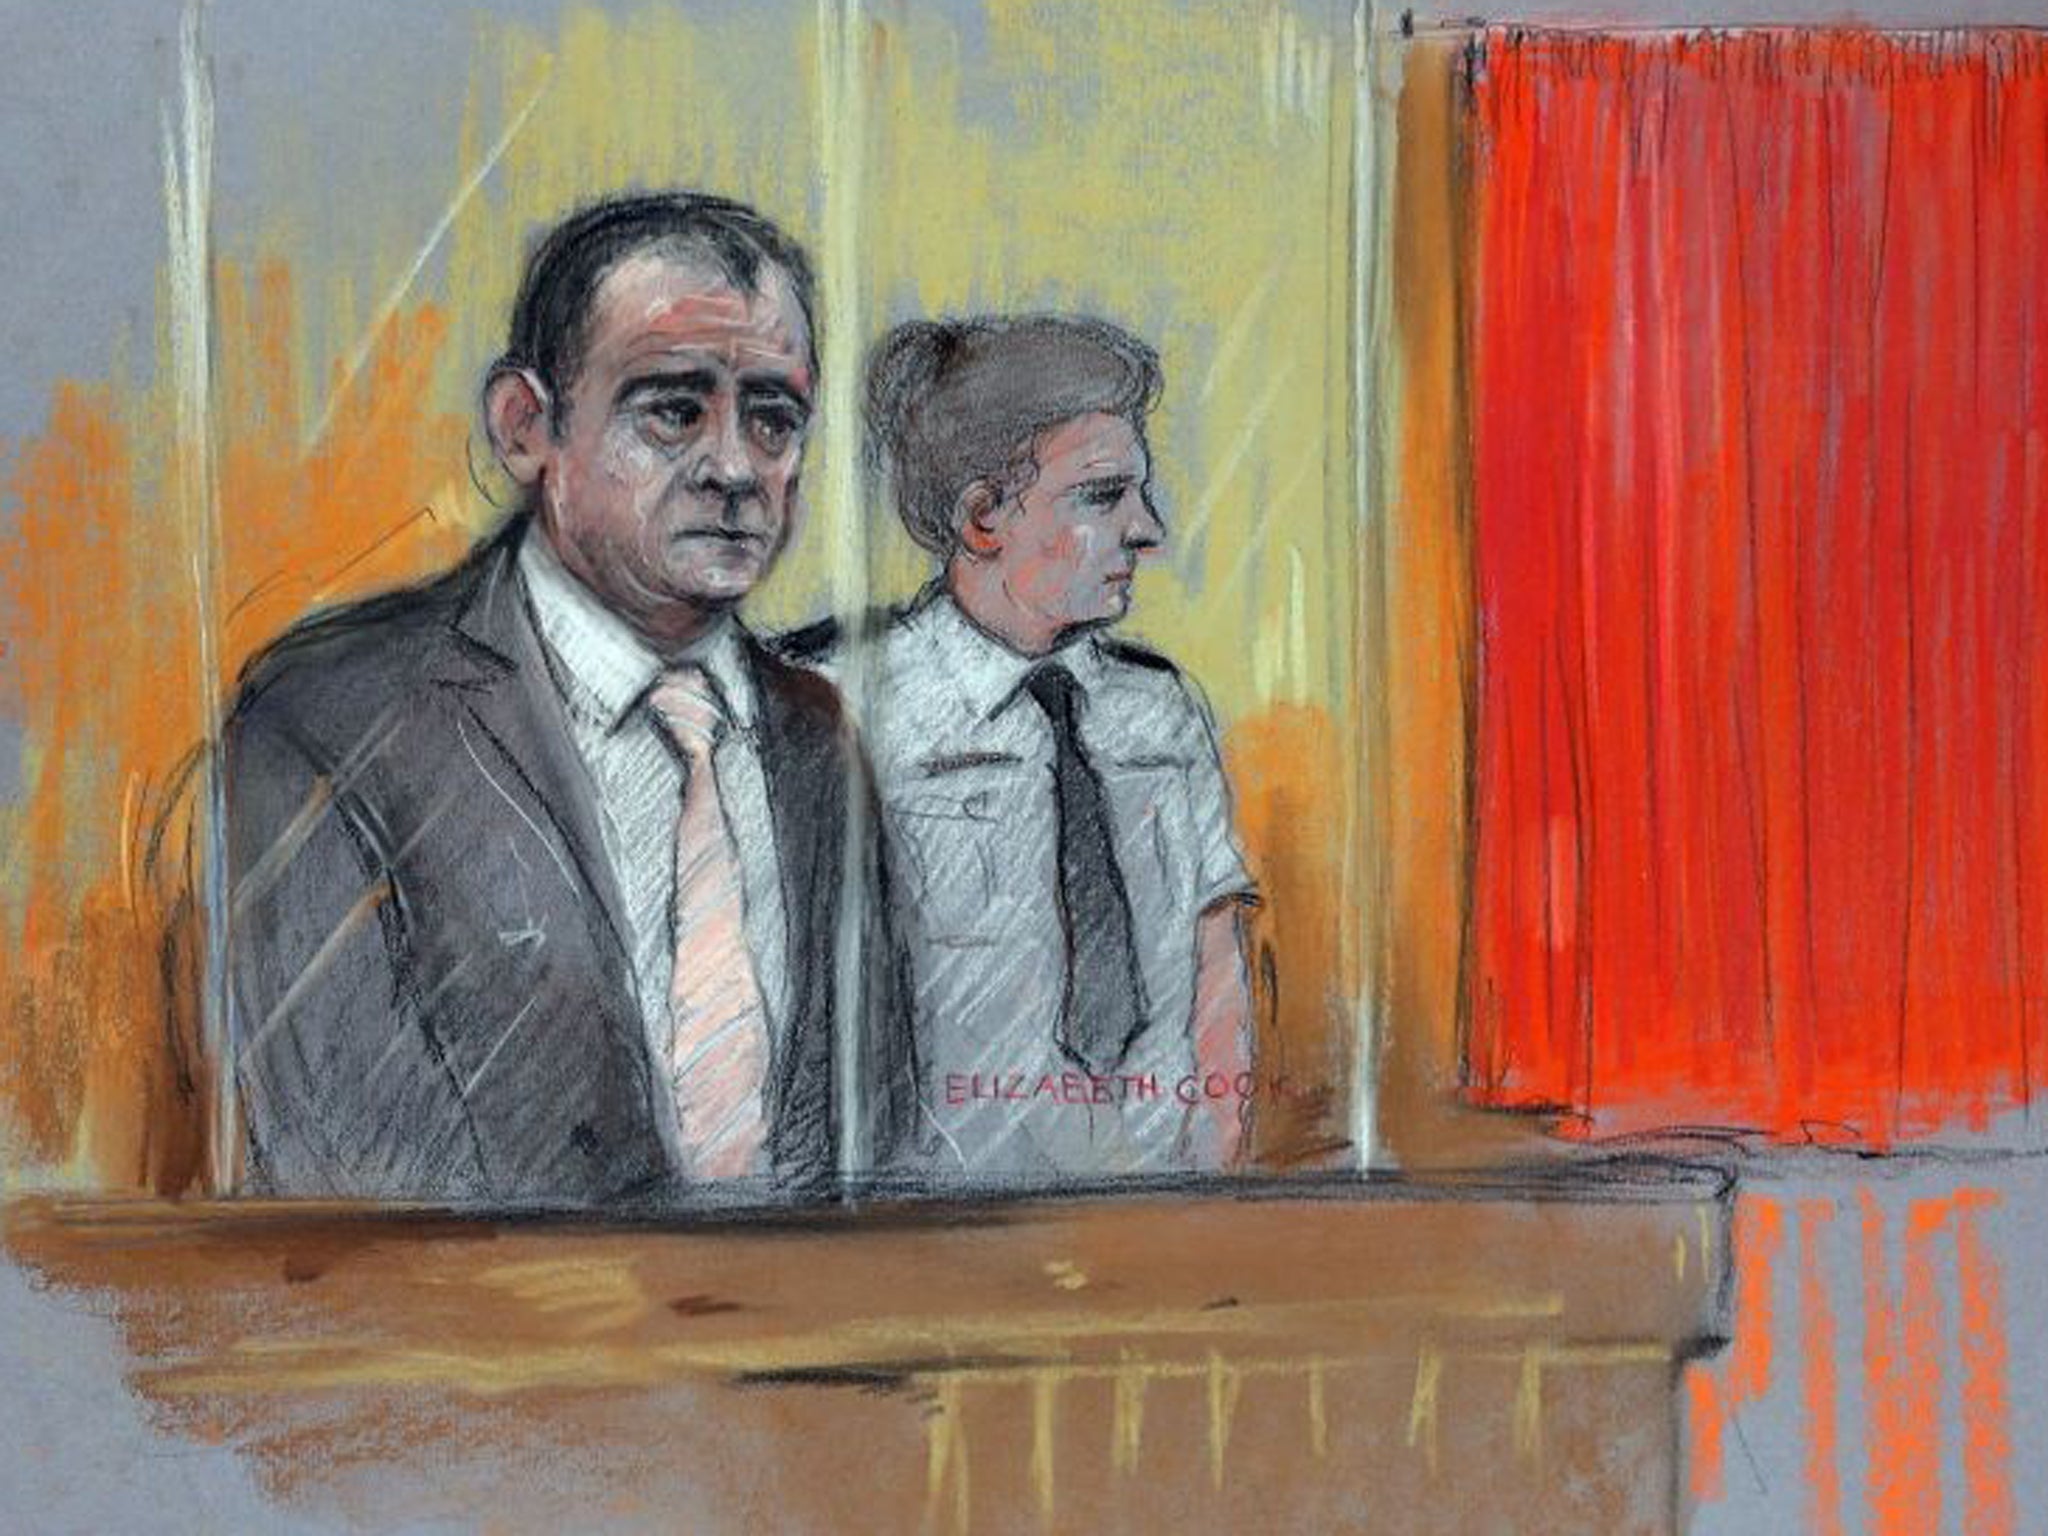 Michael Le Vell, real name Turner, is appearing at Manchester Crown Court